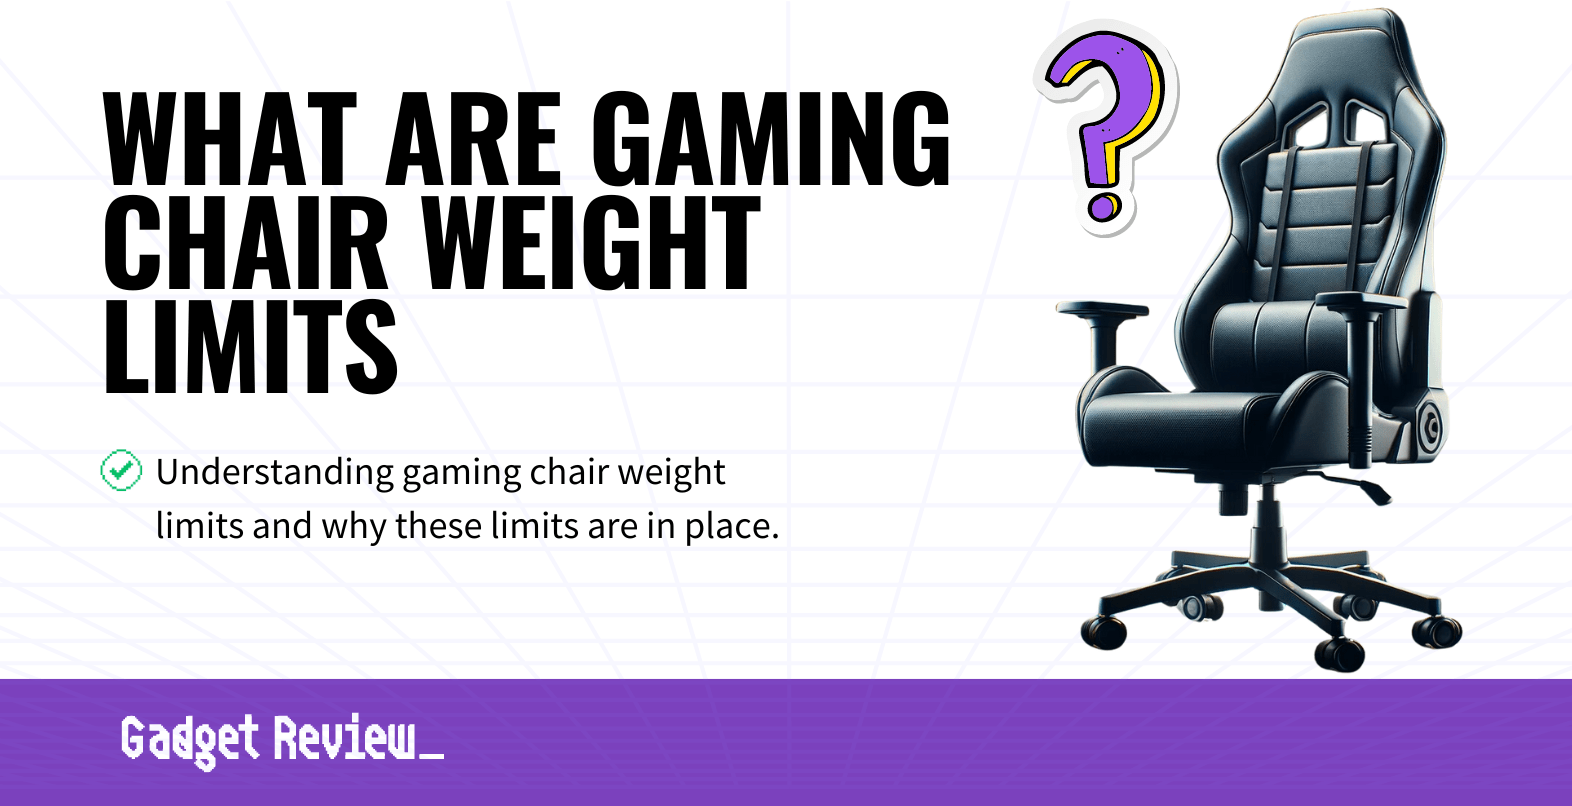 What are Gaming Chair Weight Limits?